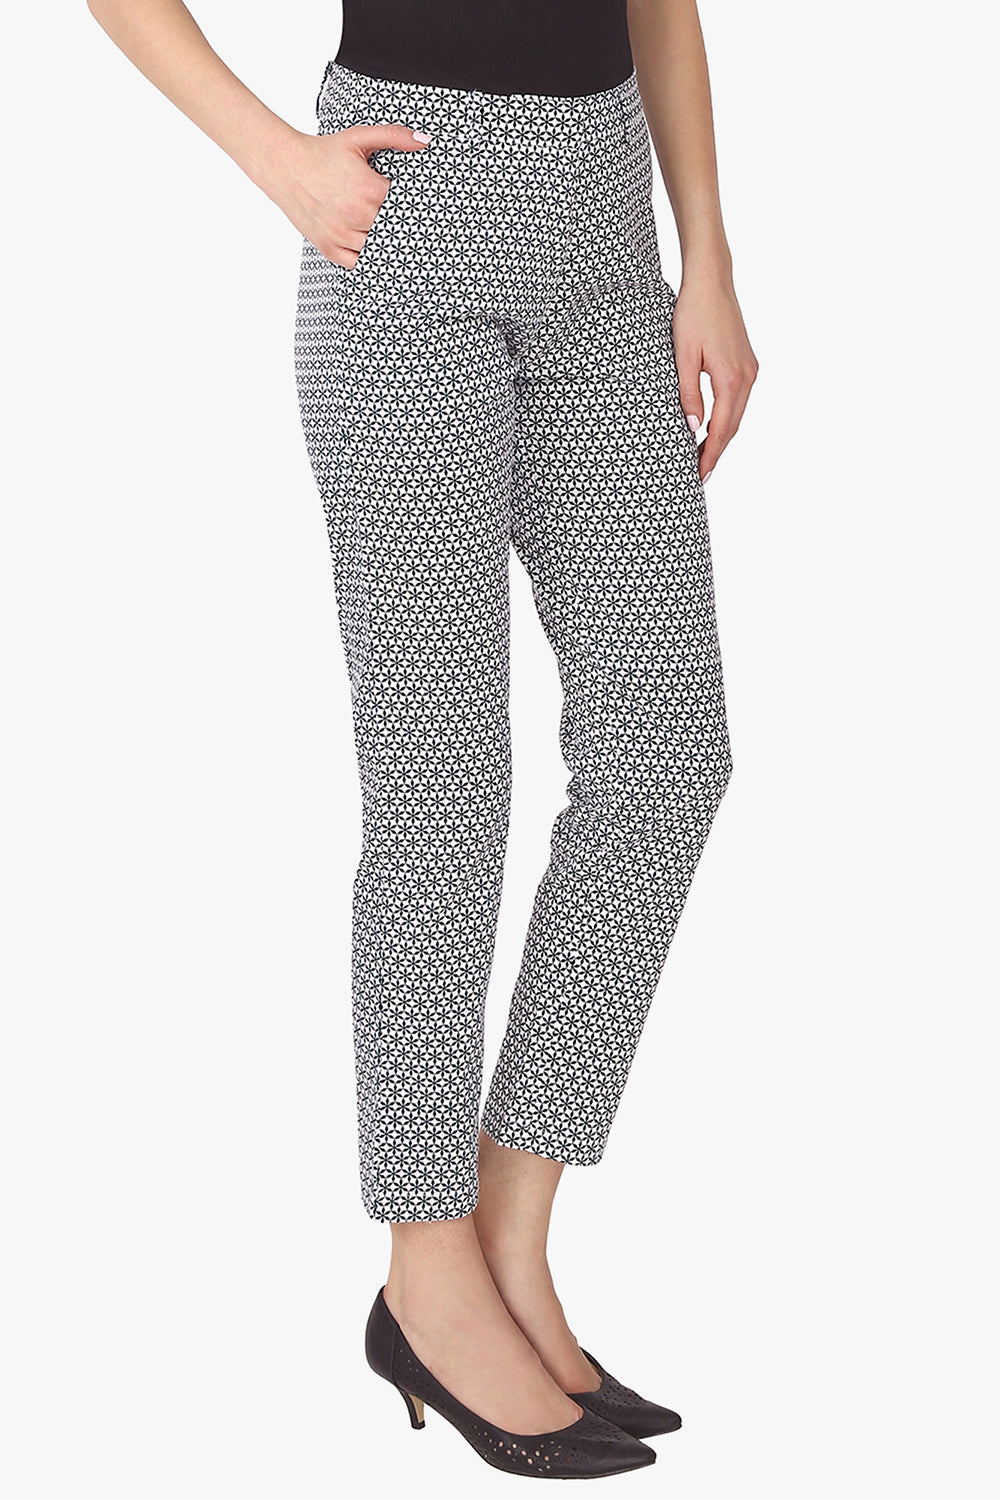 Black and White Printed Fitted Pants 